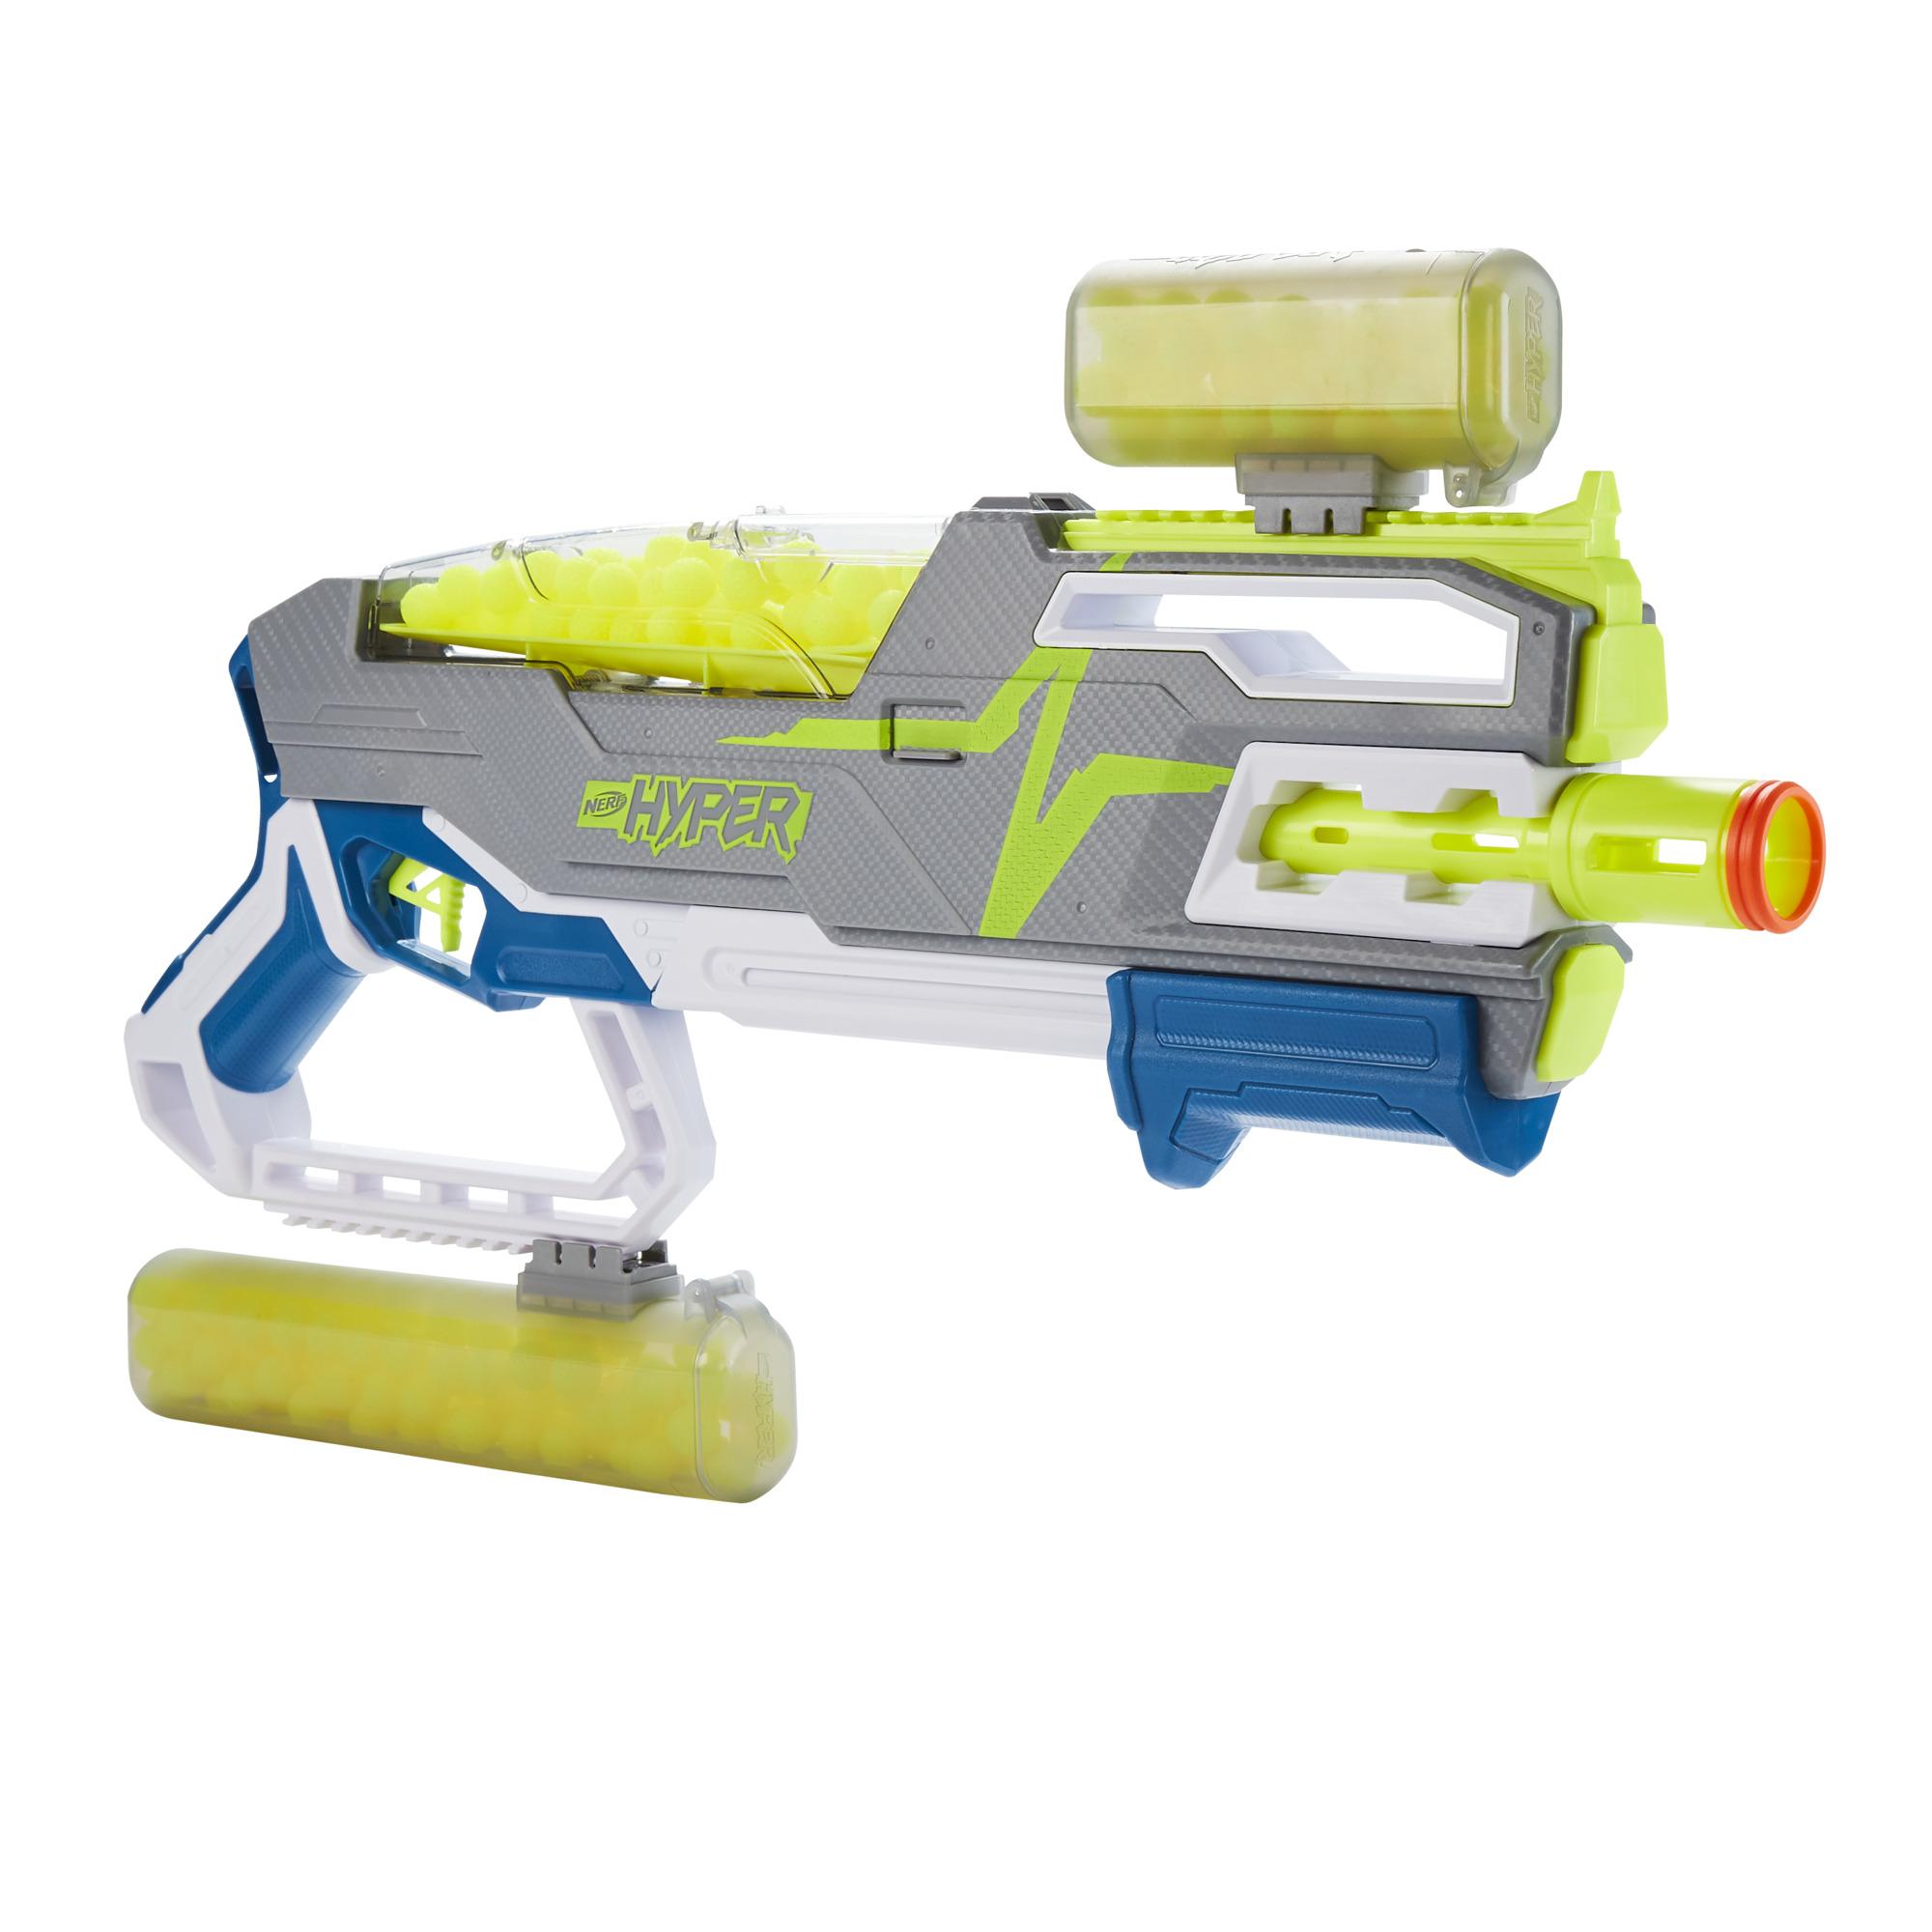 Nerf Hyper Siege-50 Pump-Action Blaster and 40 Nerf Hyper Rounds, 110 FPS Velocity, Easy Reload, 50- Round Capacity